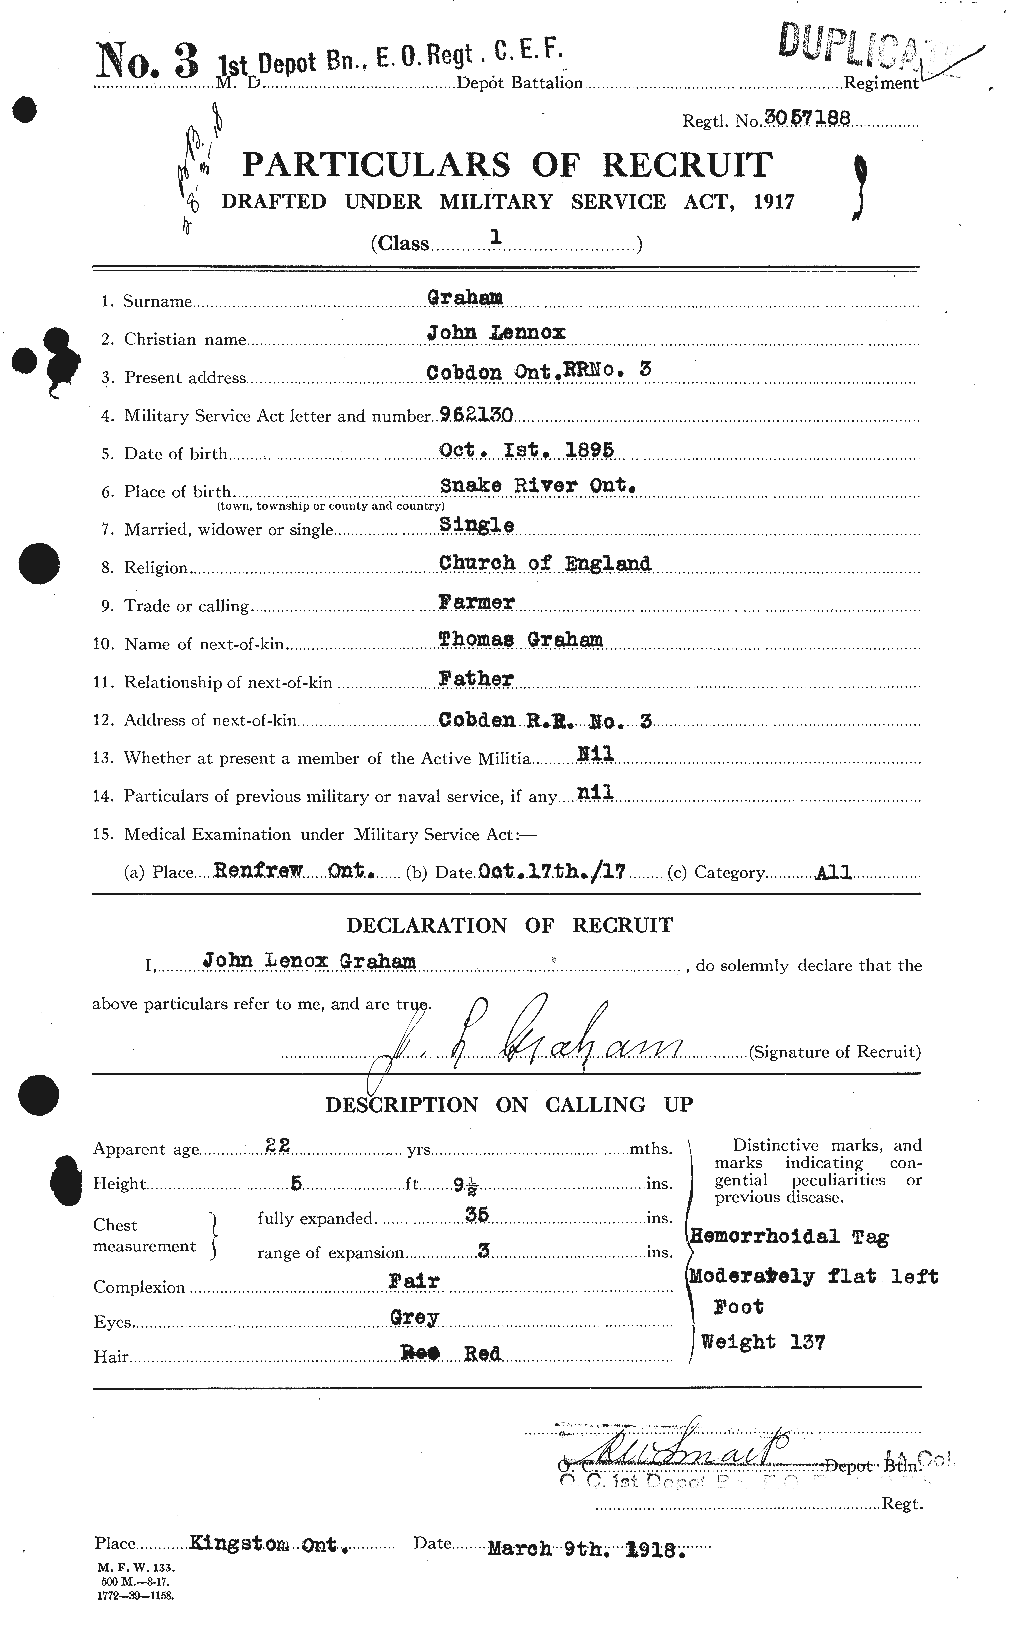 Personnel Records of the First World War - CEF 359193a